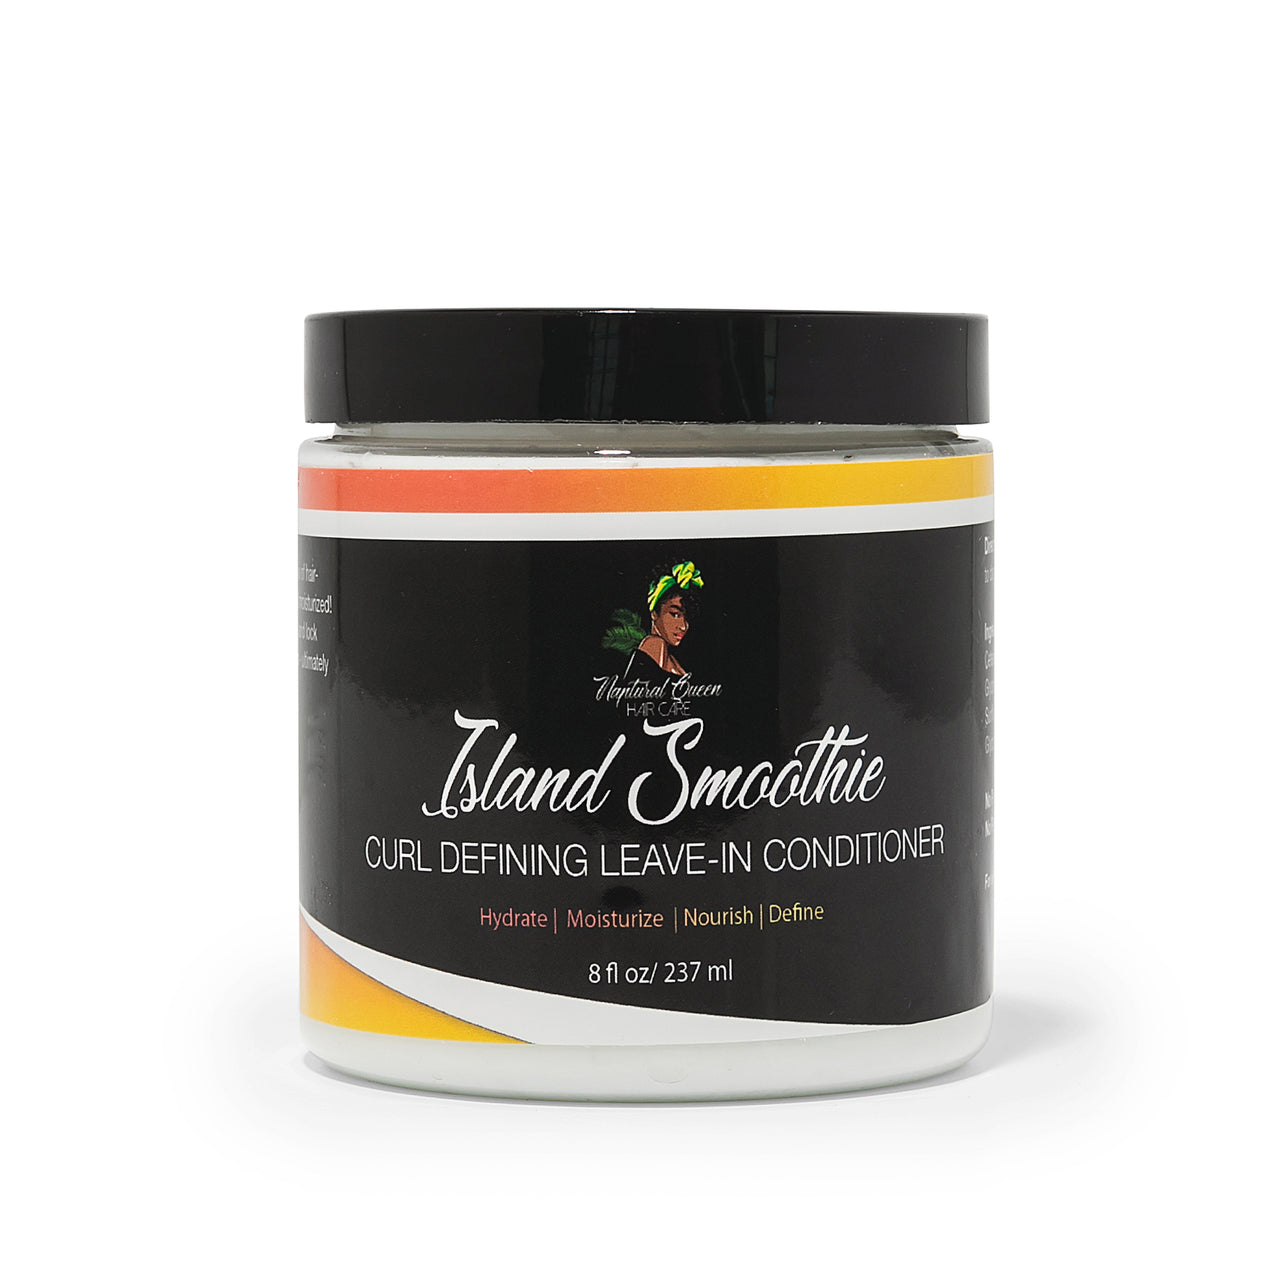 Island Smoothie Curl Defining Leave-in Conditioner